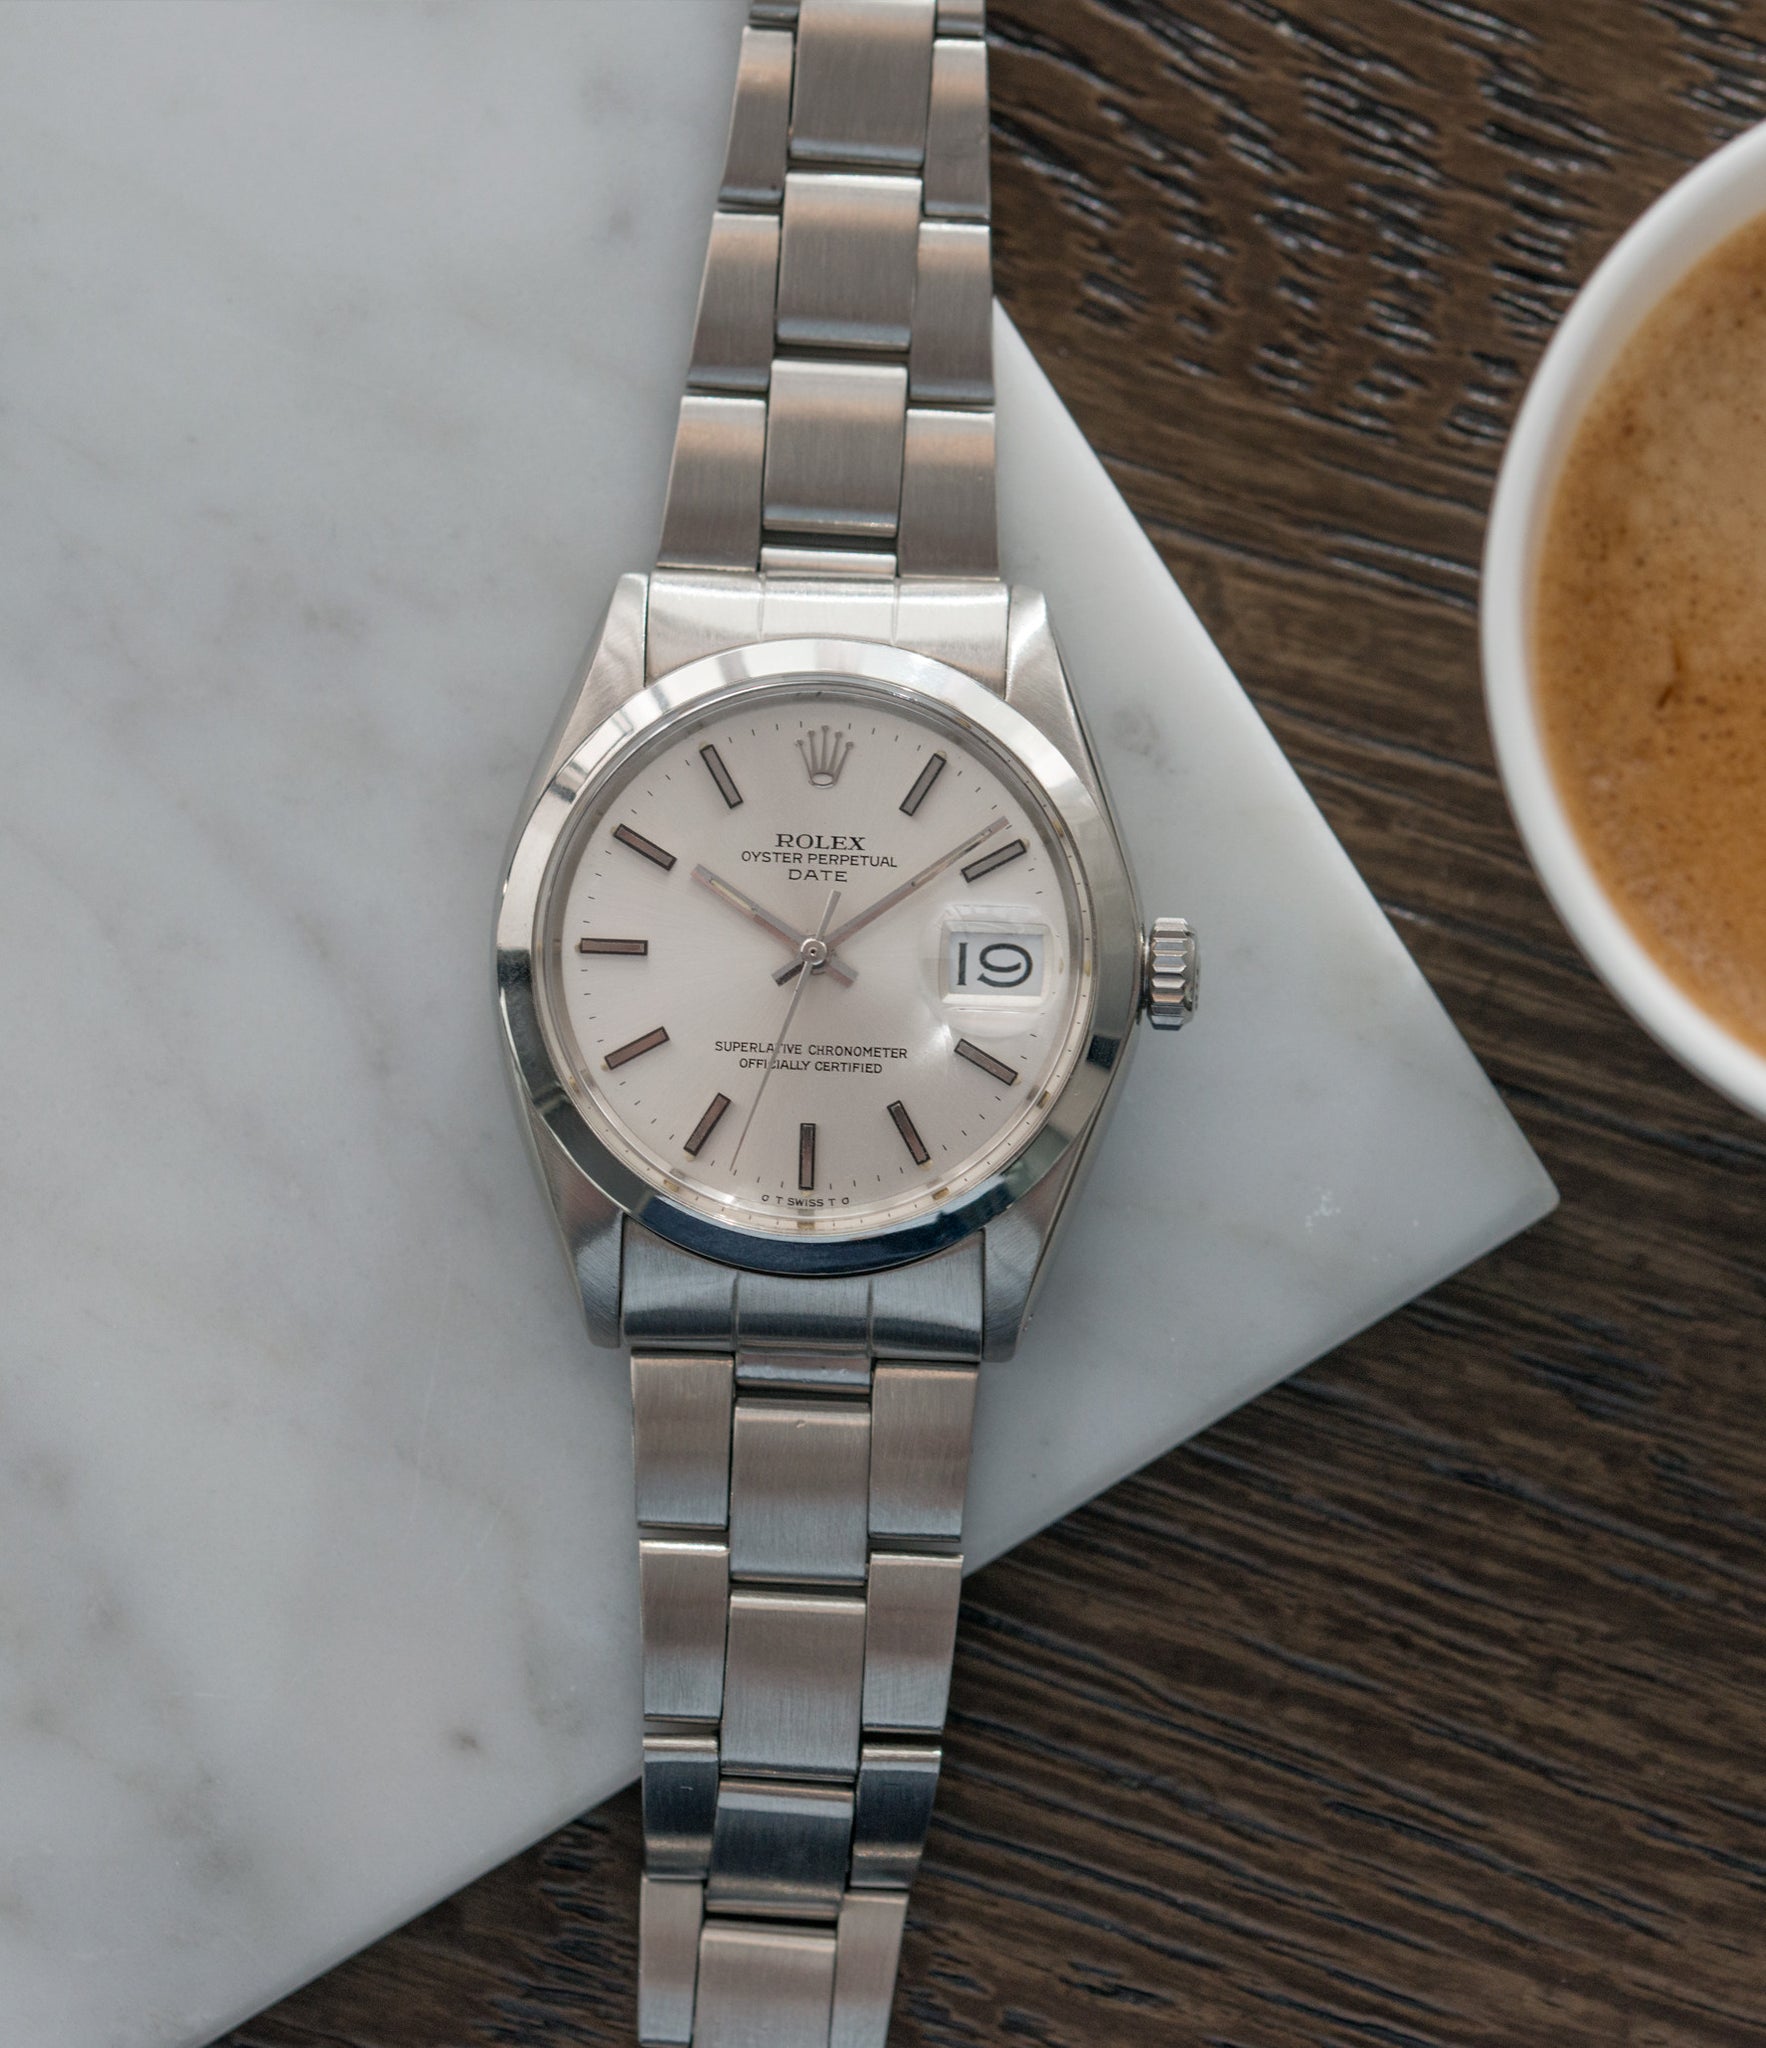 buy Rolex Oyster Date 1500 steel vintage watch full set for sale online at A Collected Man rare vintage watch specialist